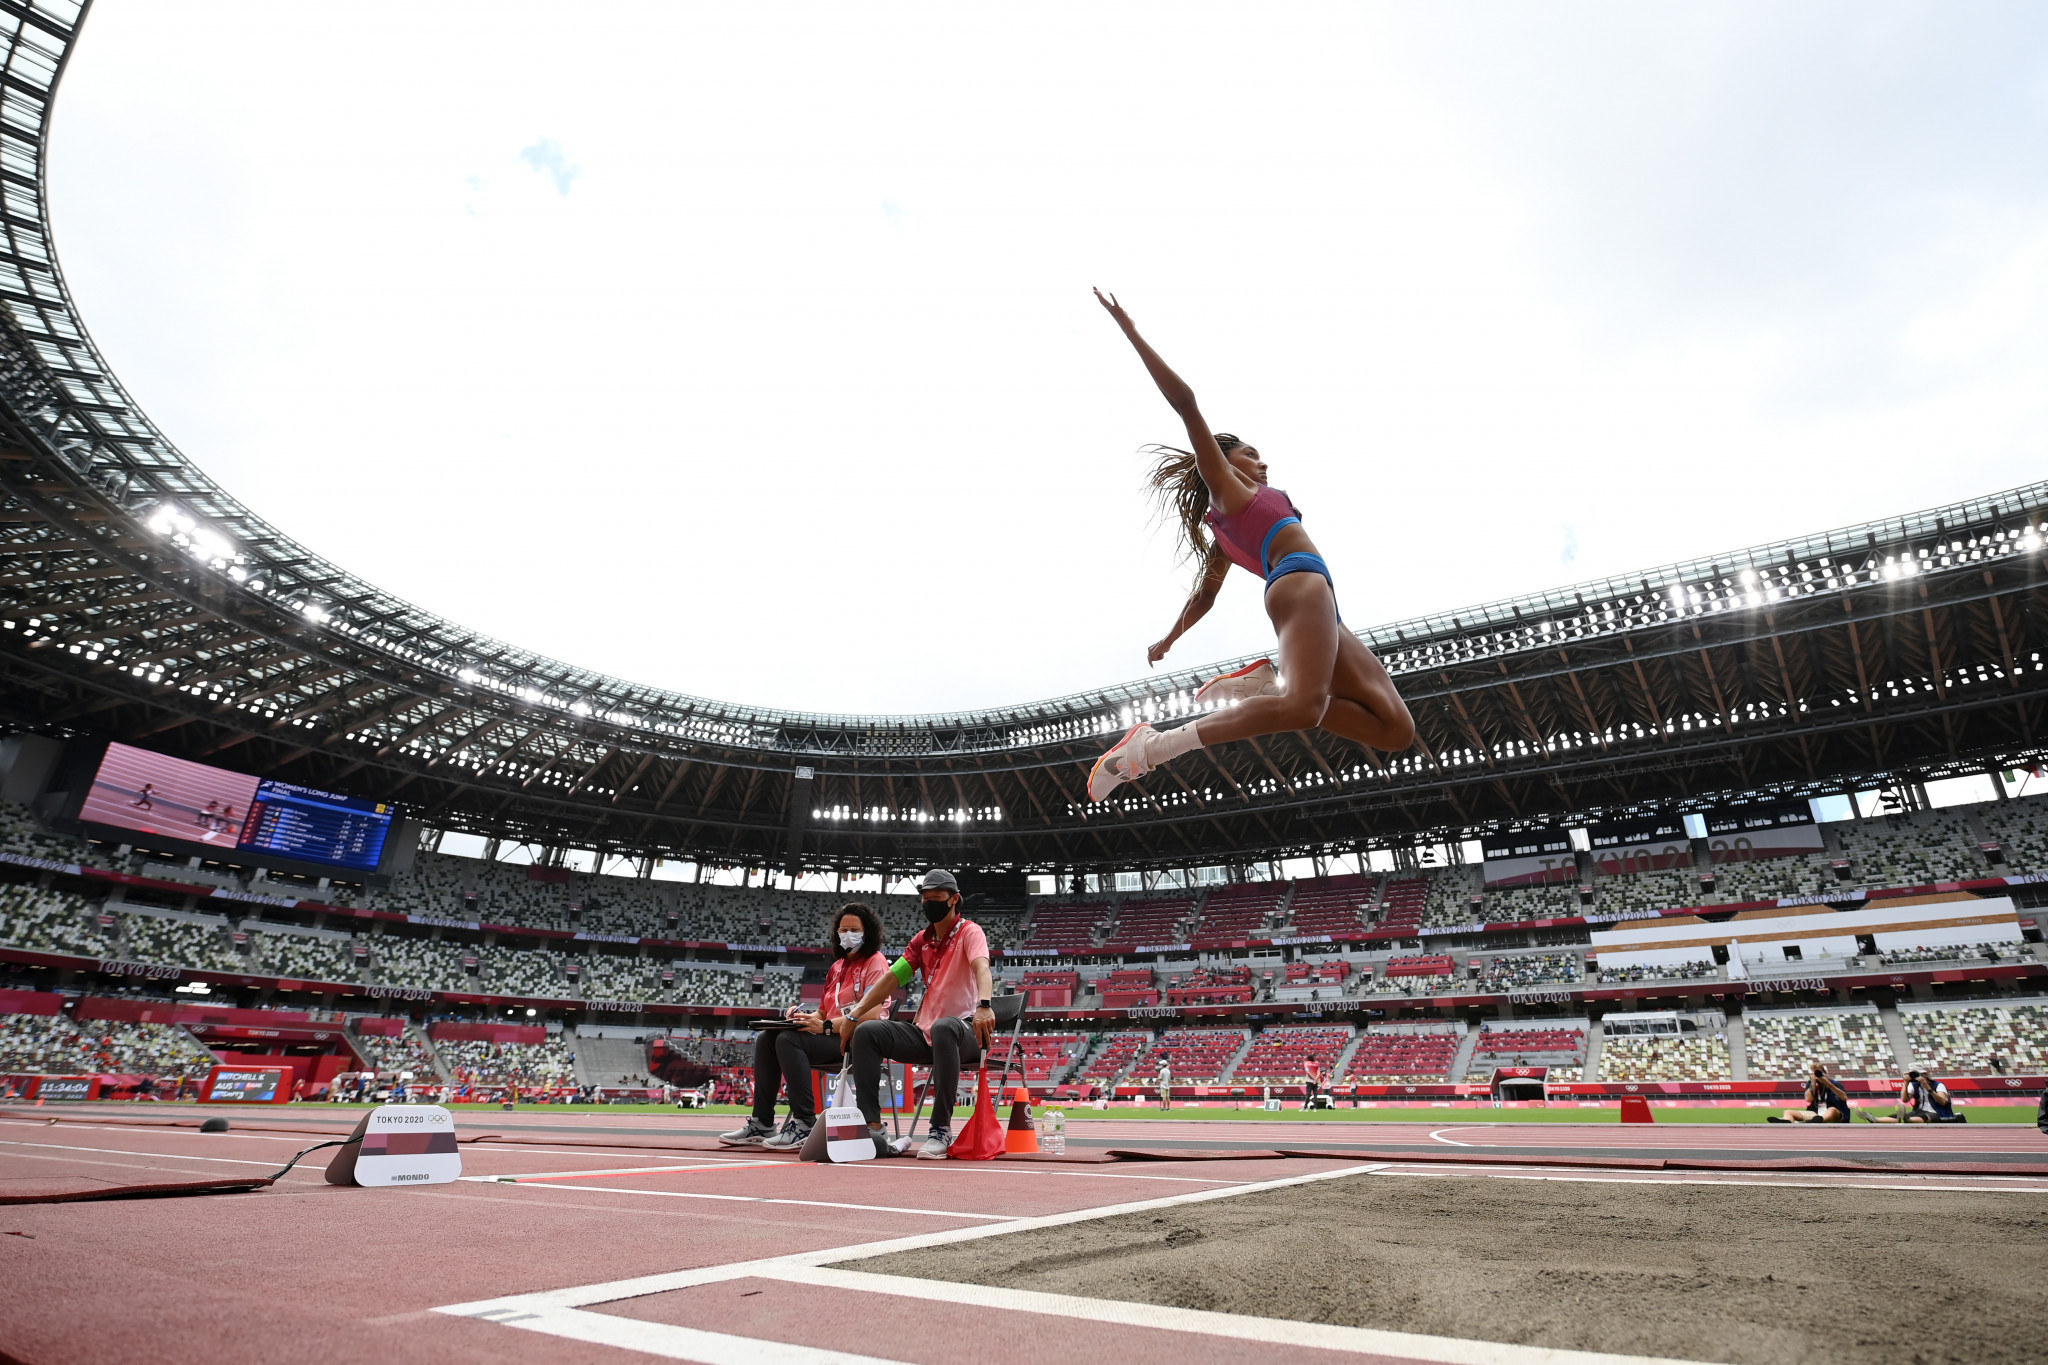 Tara Davis-Woodhall had finished sixth in the long jump at Tokyo 2020 ©Getty Images